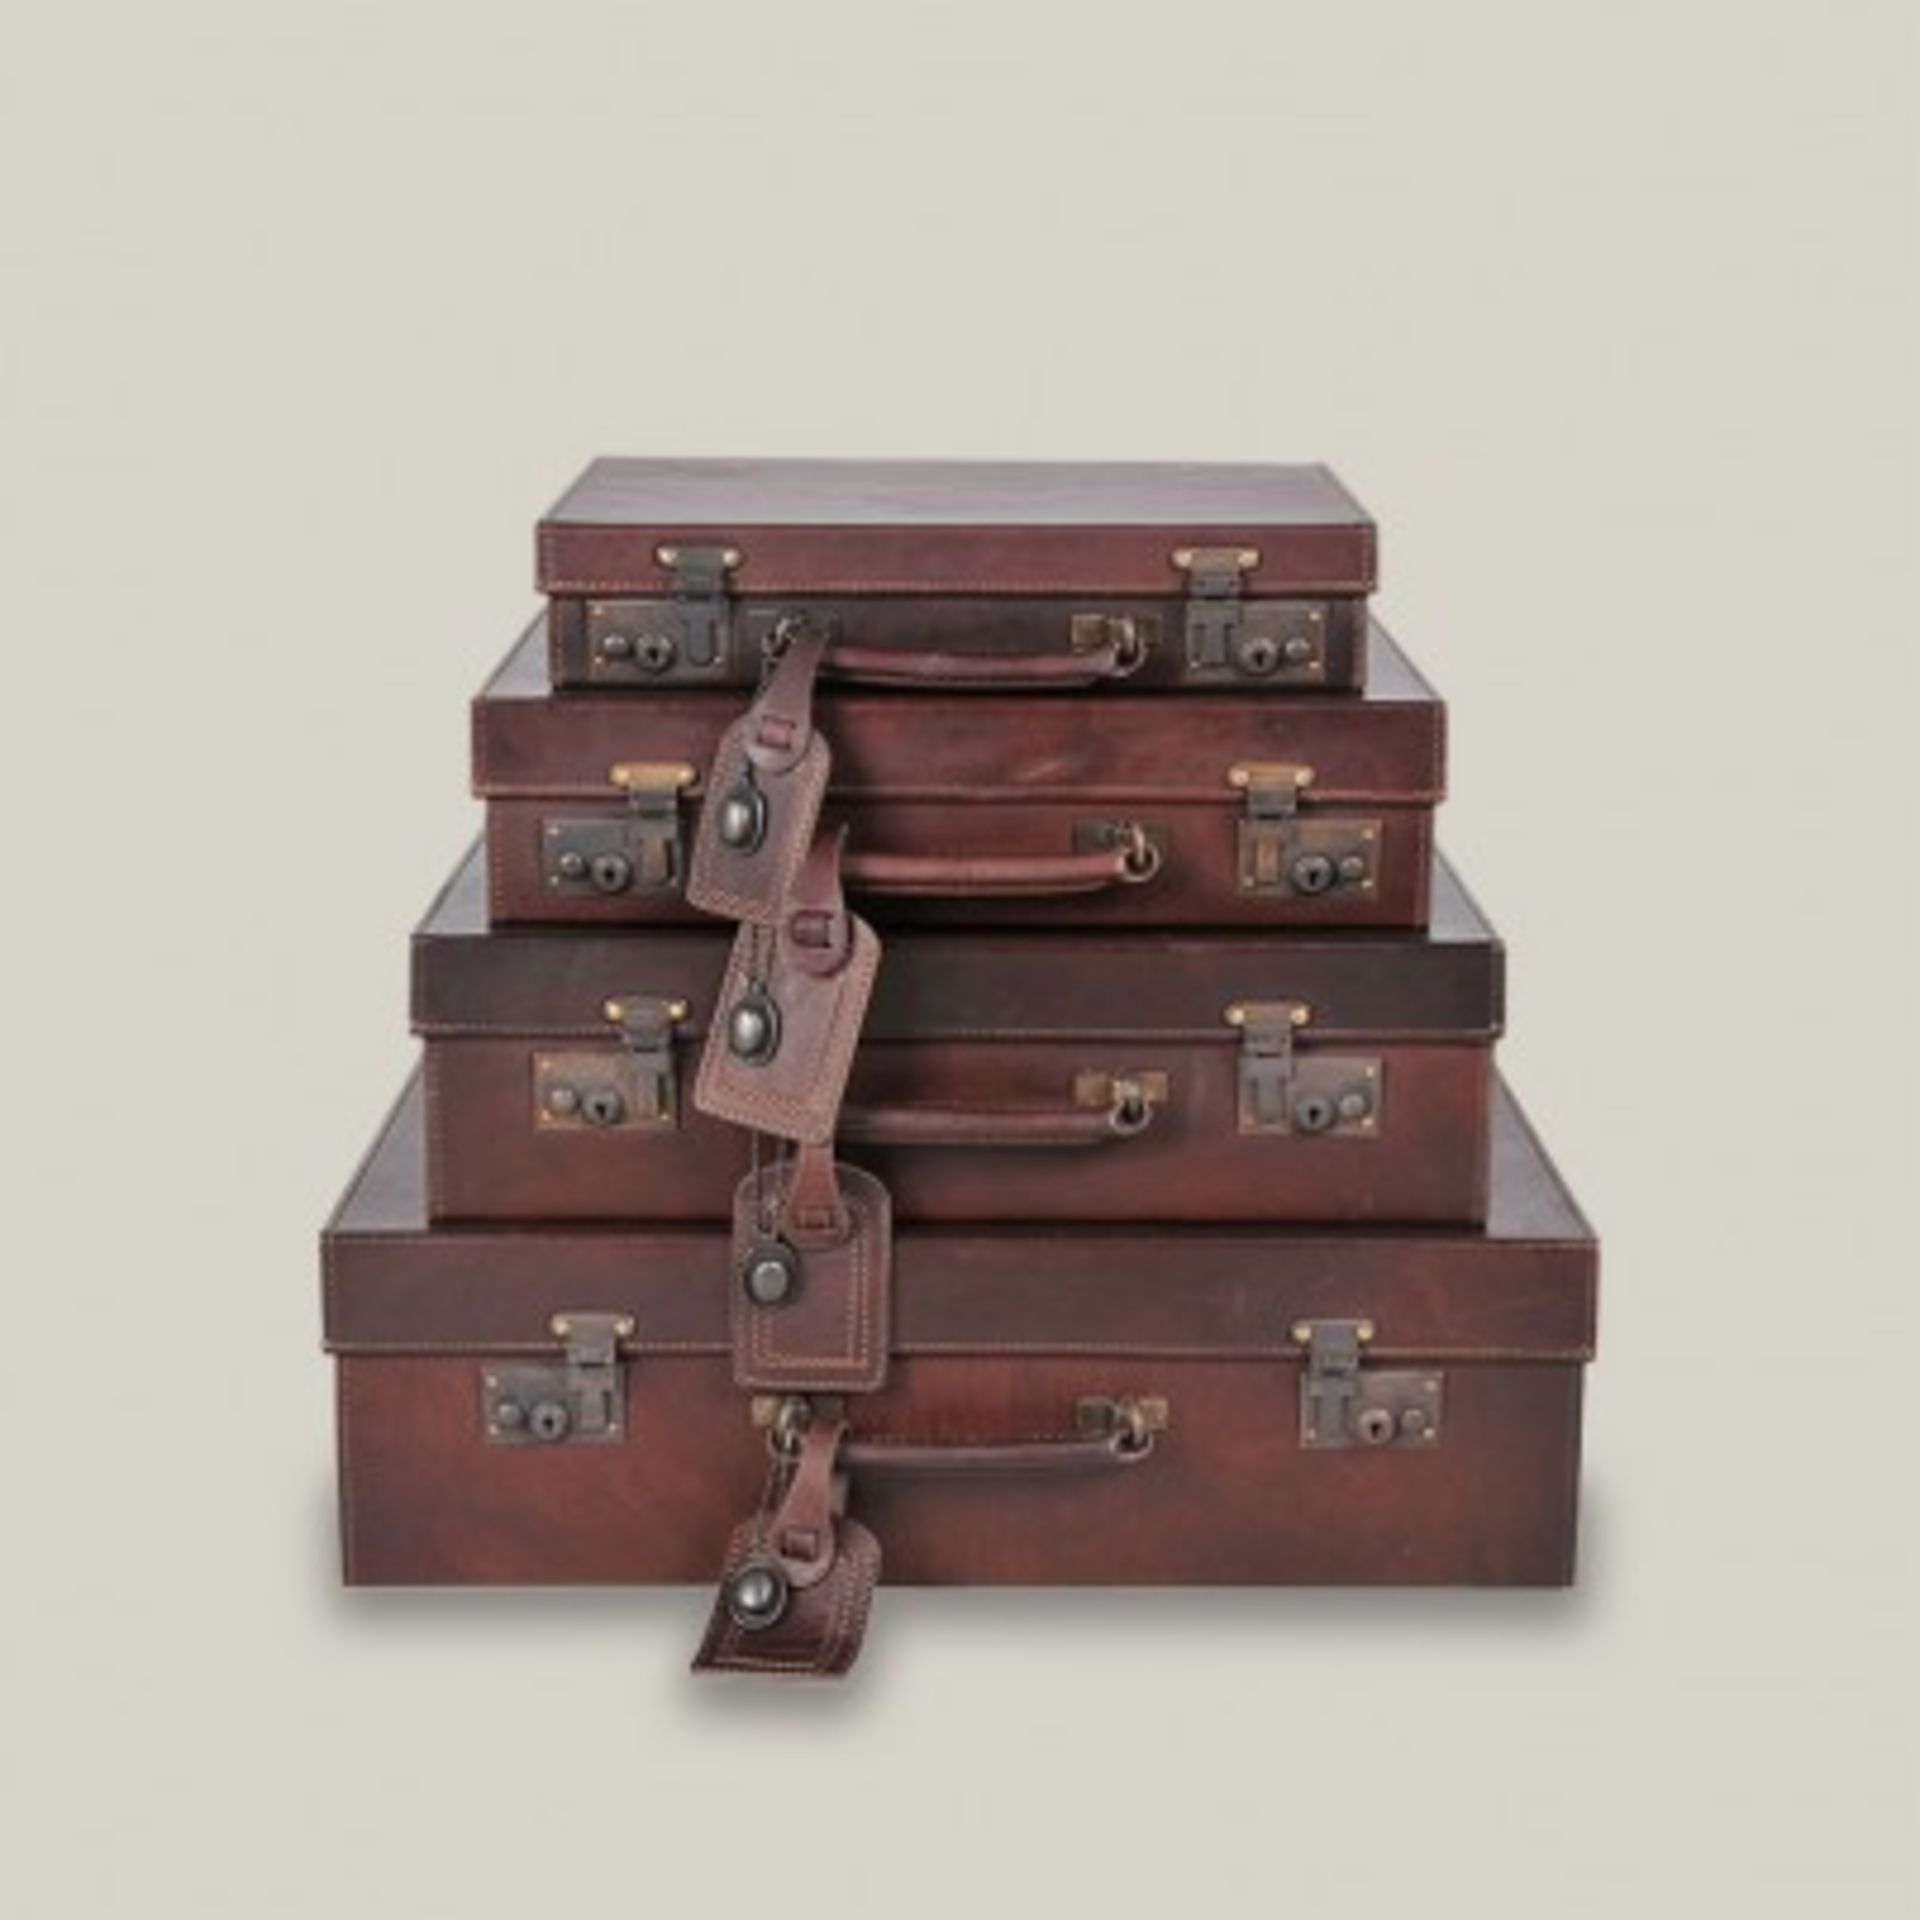 Drake Briefcase Medium Andes 45.5 X 33 X 12.5cm After Sir Francis Drake Sea Captain And Privateer - Image 2 of 2